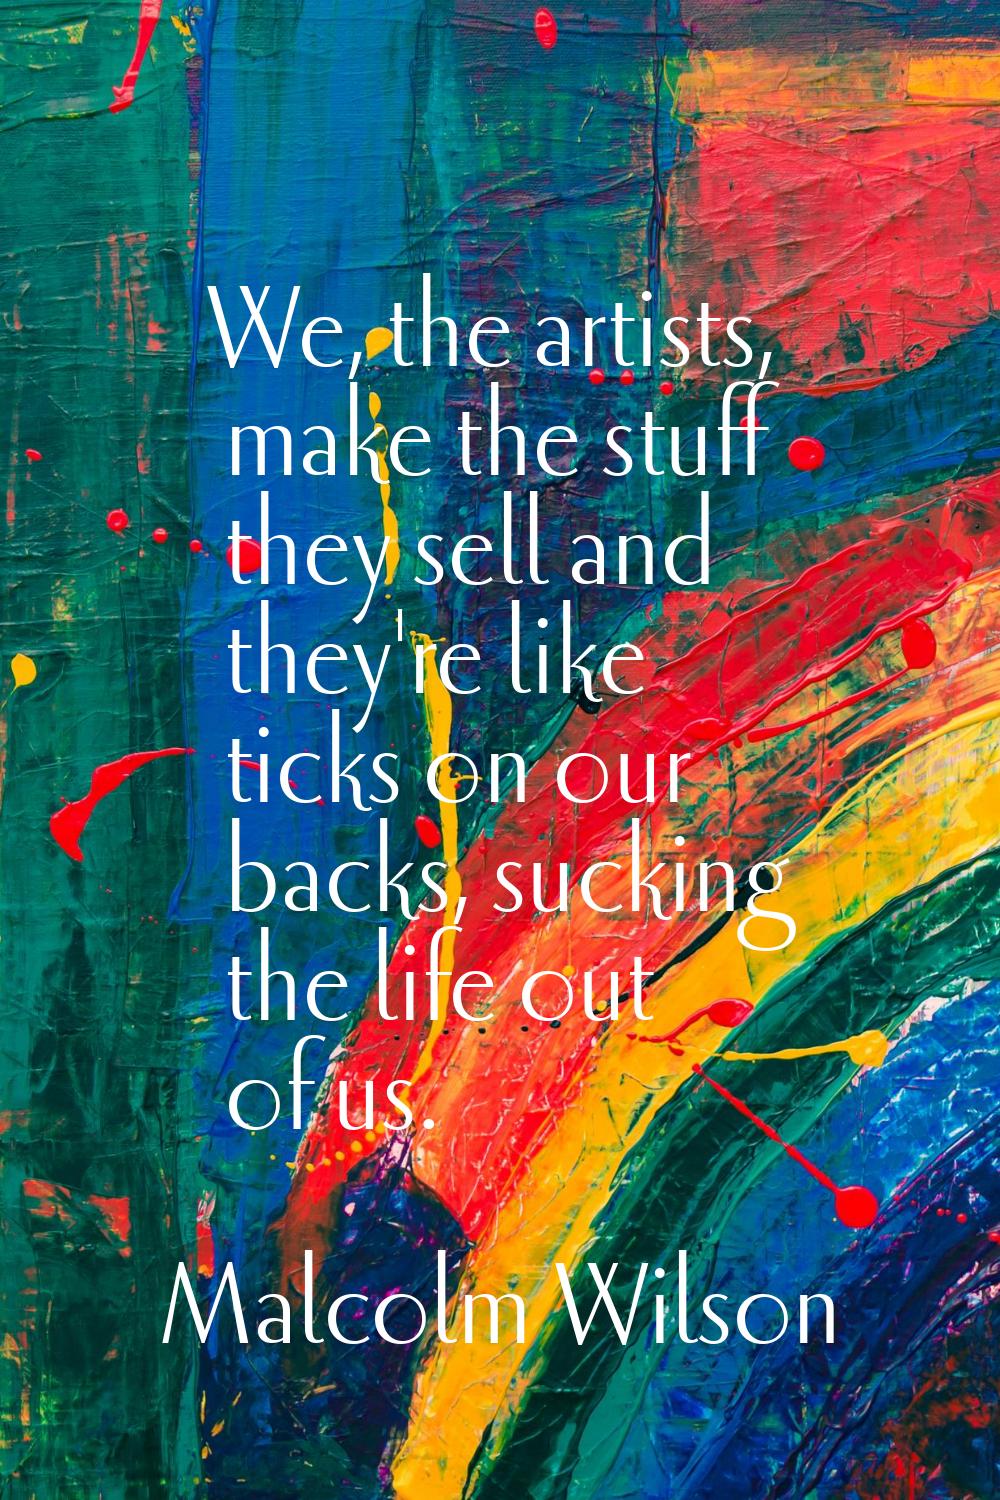 We, the artists, make the stuff they sell and they're like ticks on our backs, sucking the life out